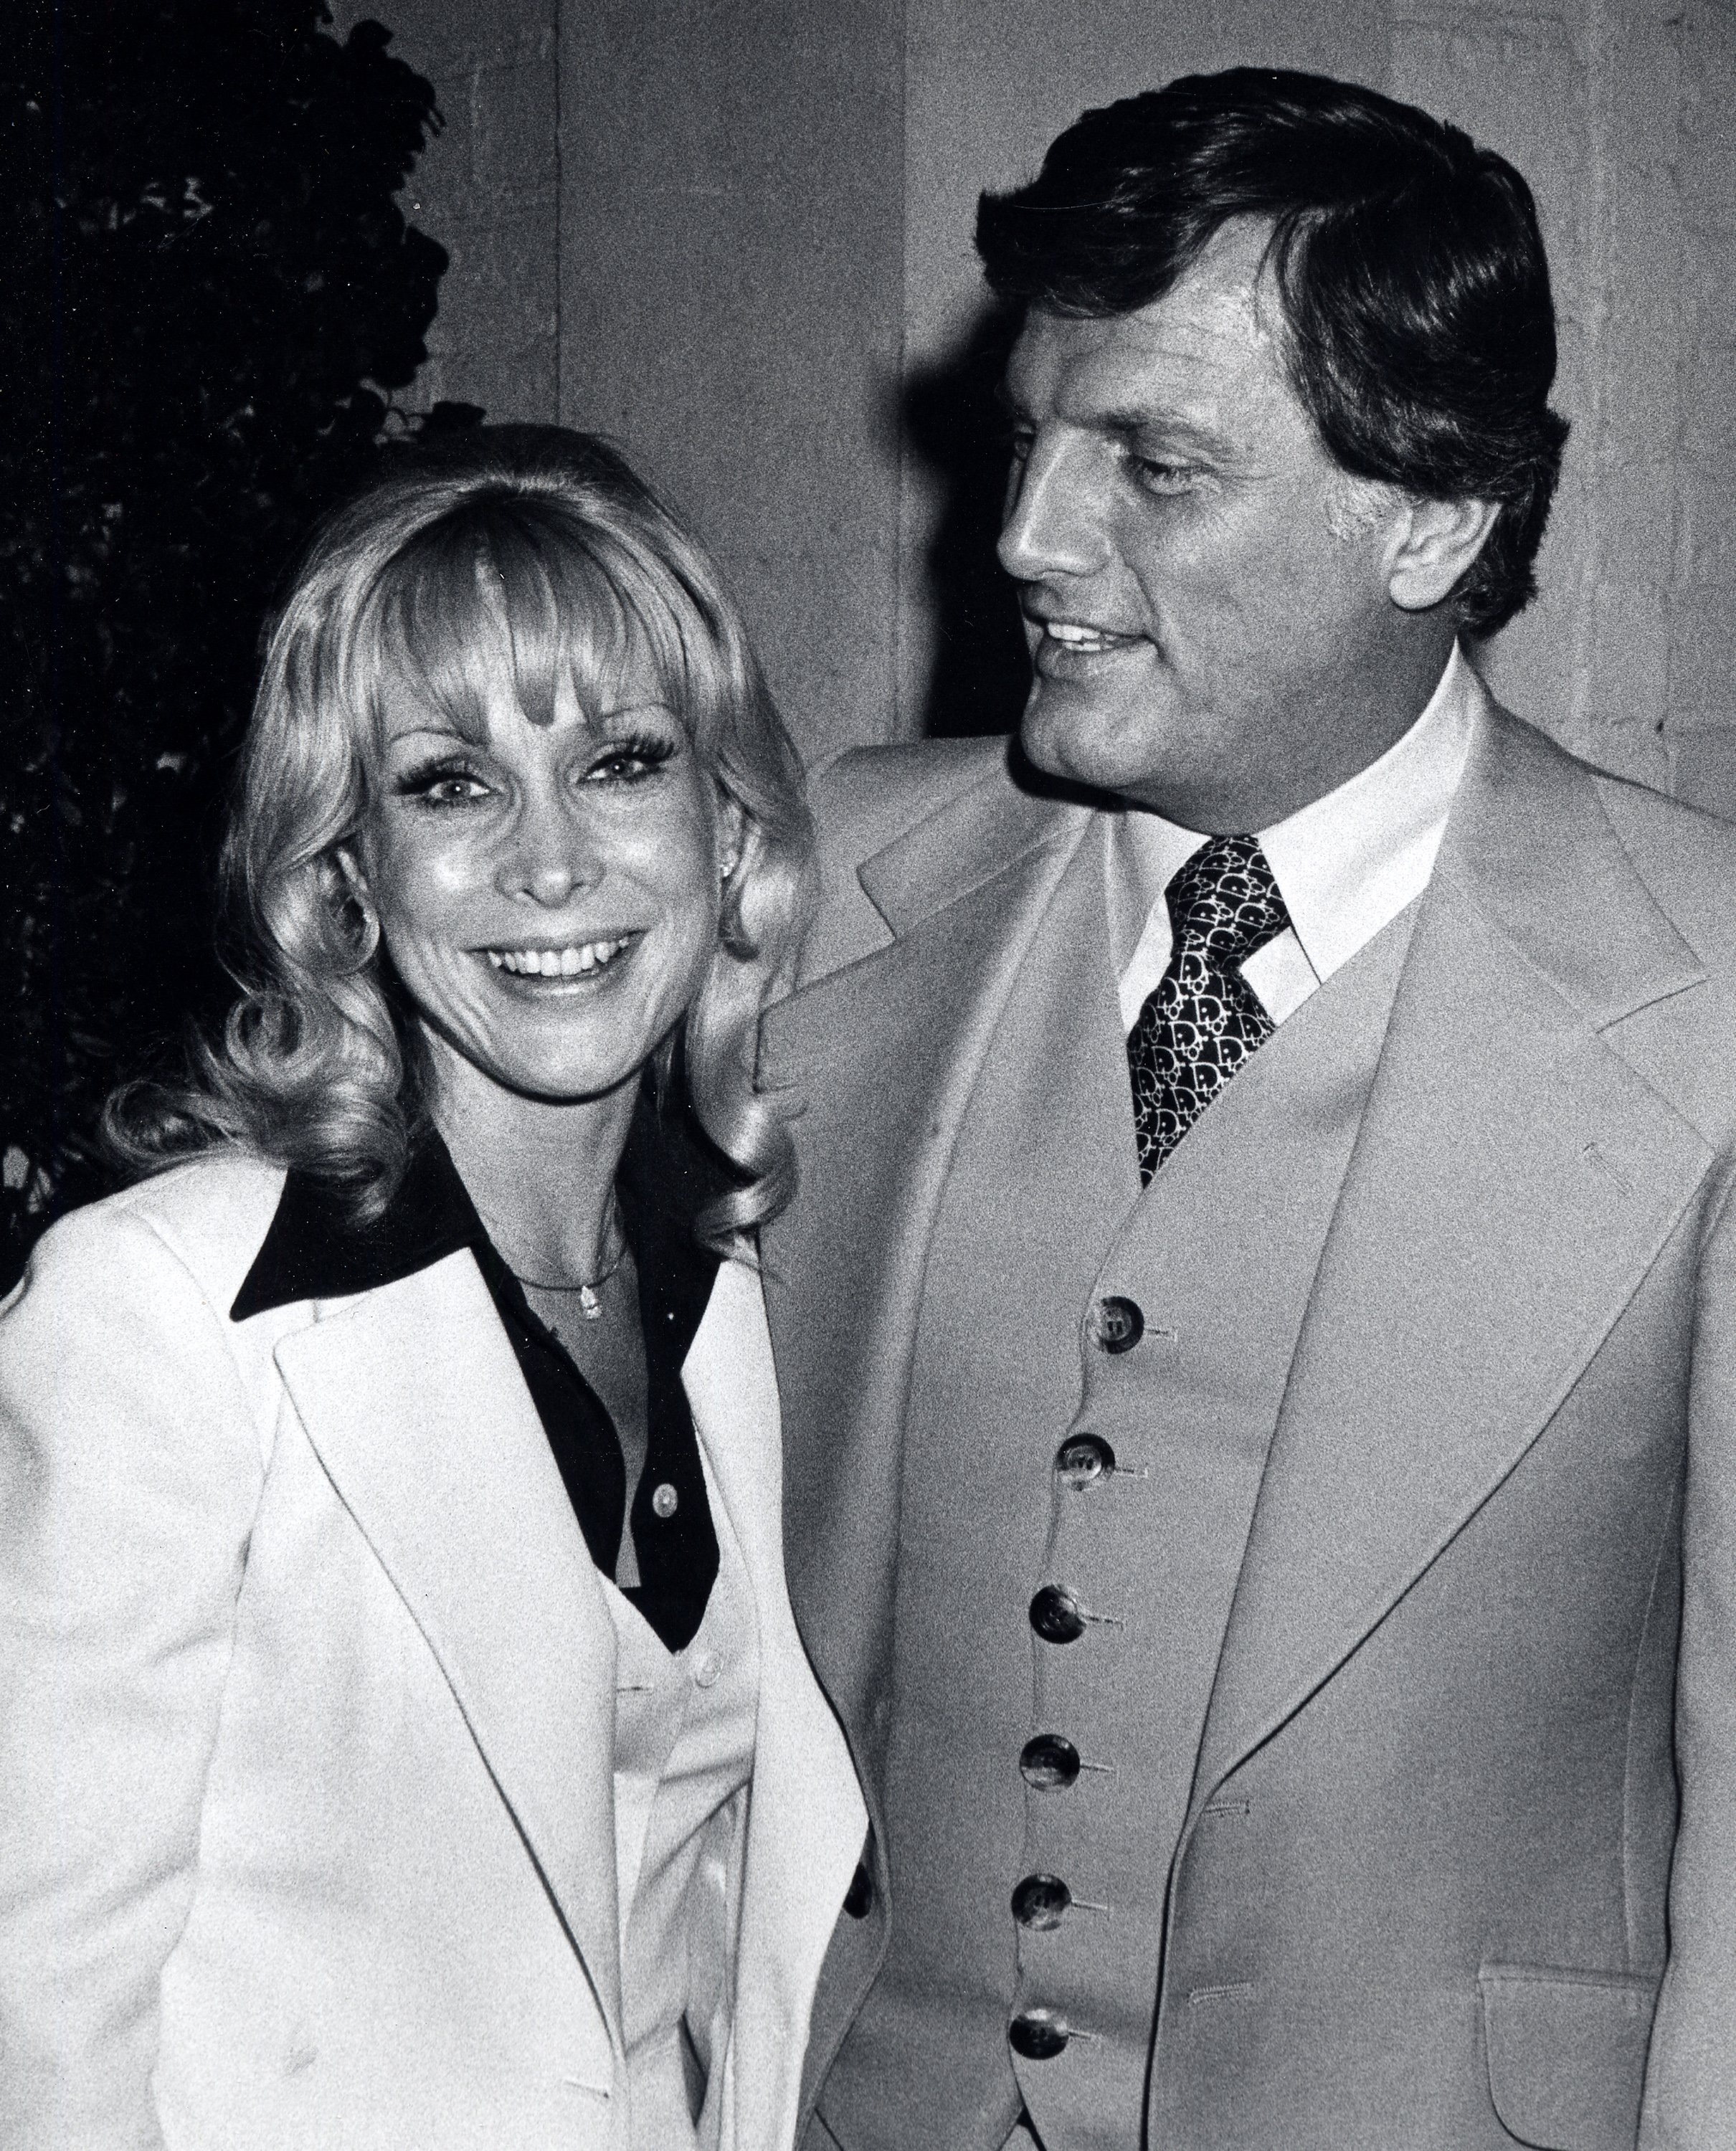 Barbara Eden and reporter Charles Fegert being photographed on March 26, 1976, at Chasen's Restaurant in Beverly Hills, California. | Source: Getty Images